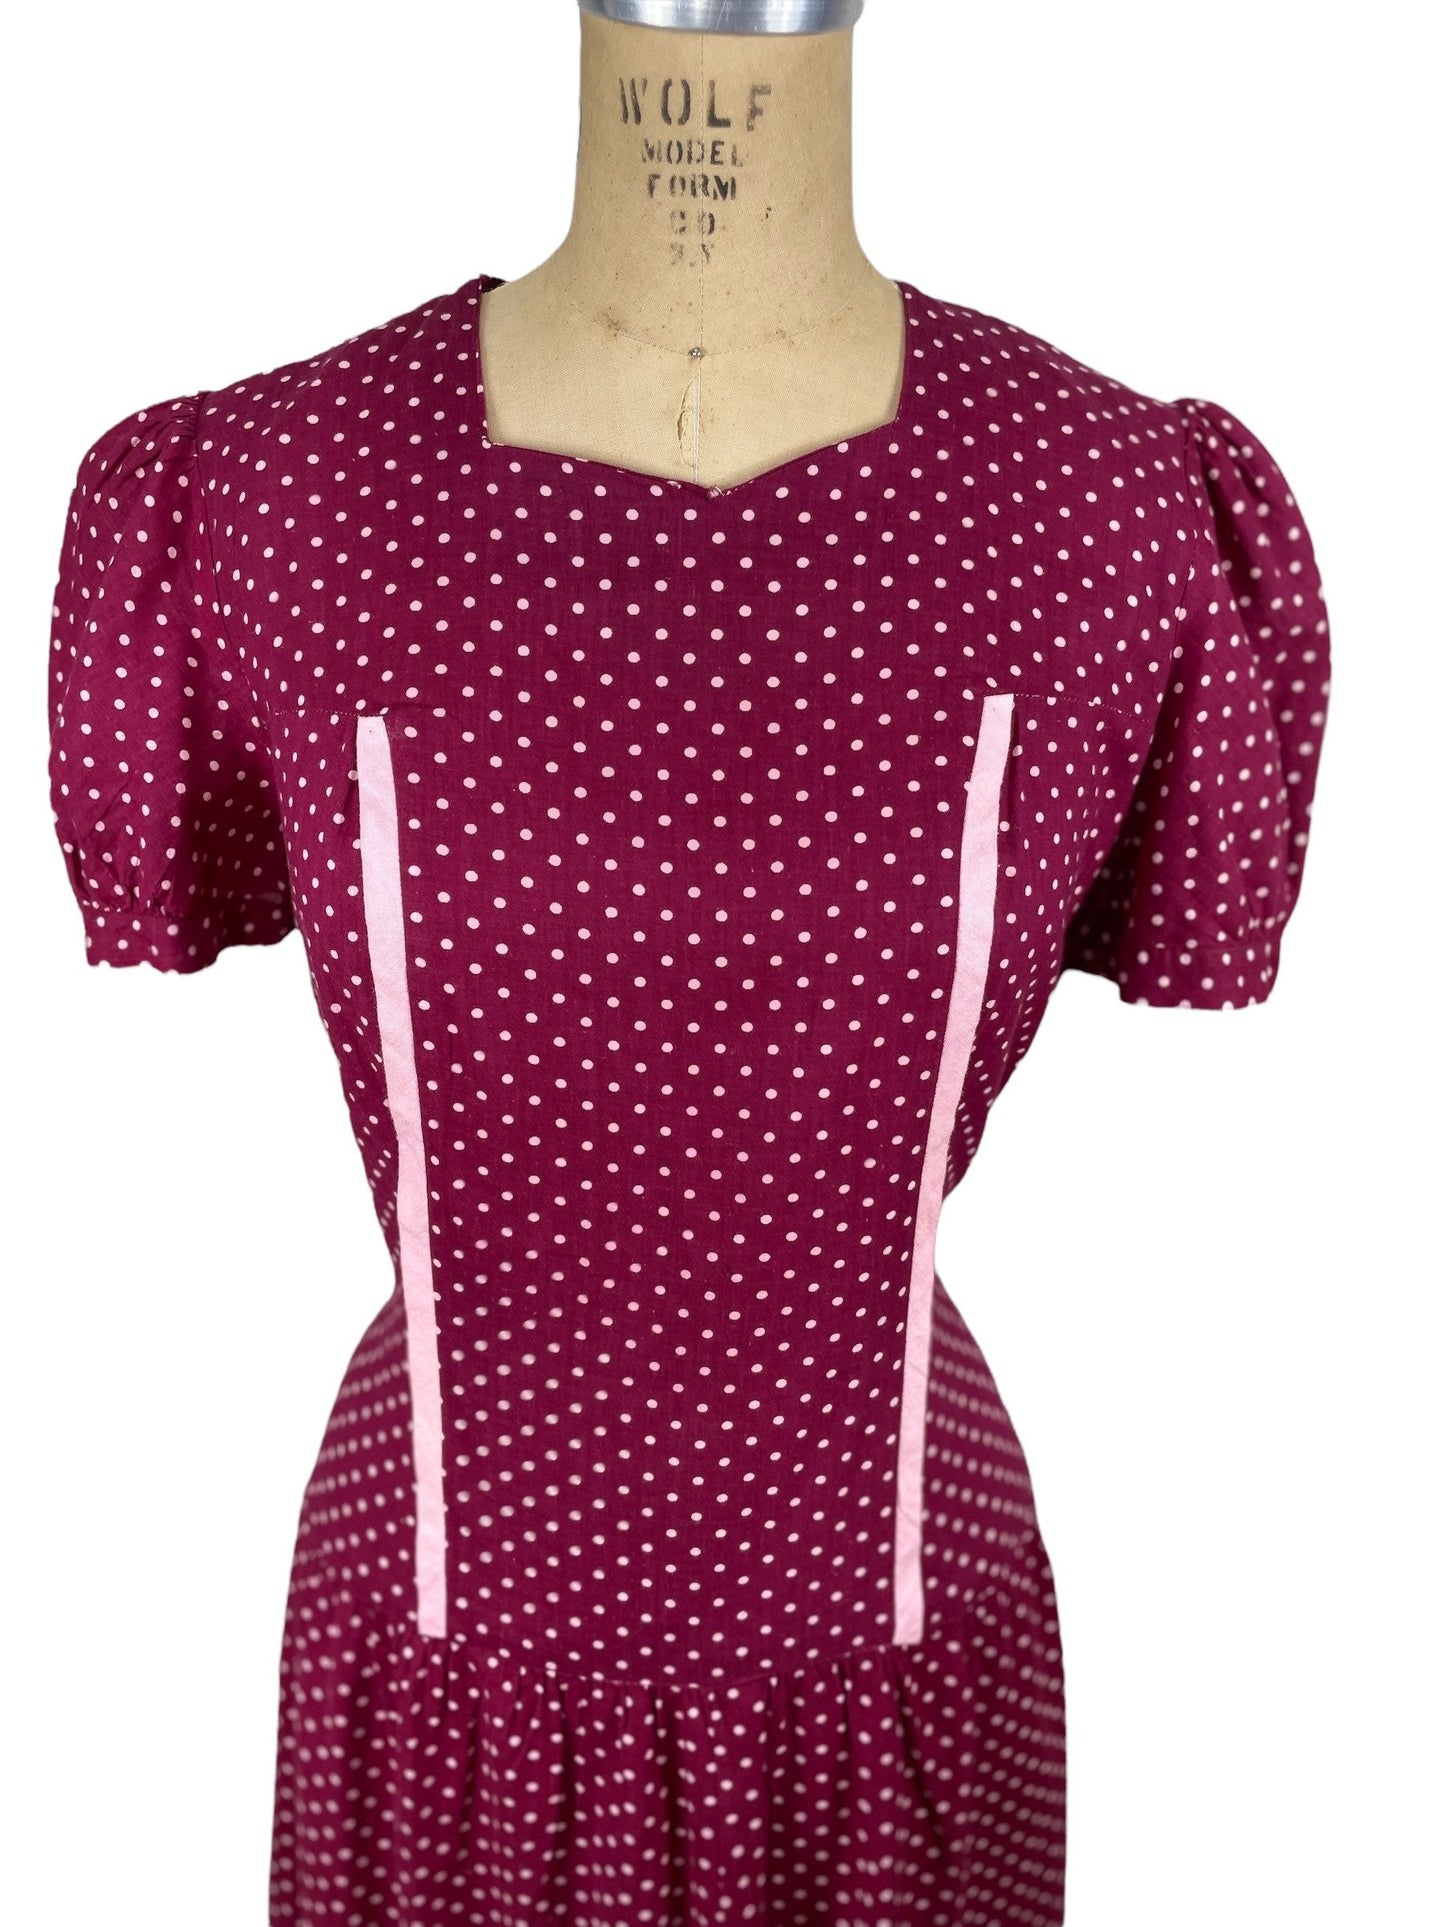 1930s cotton day dress maroon and pink polka dot print Size M